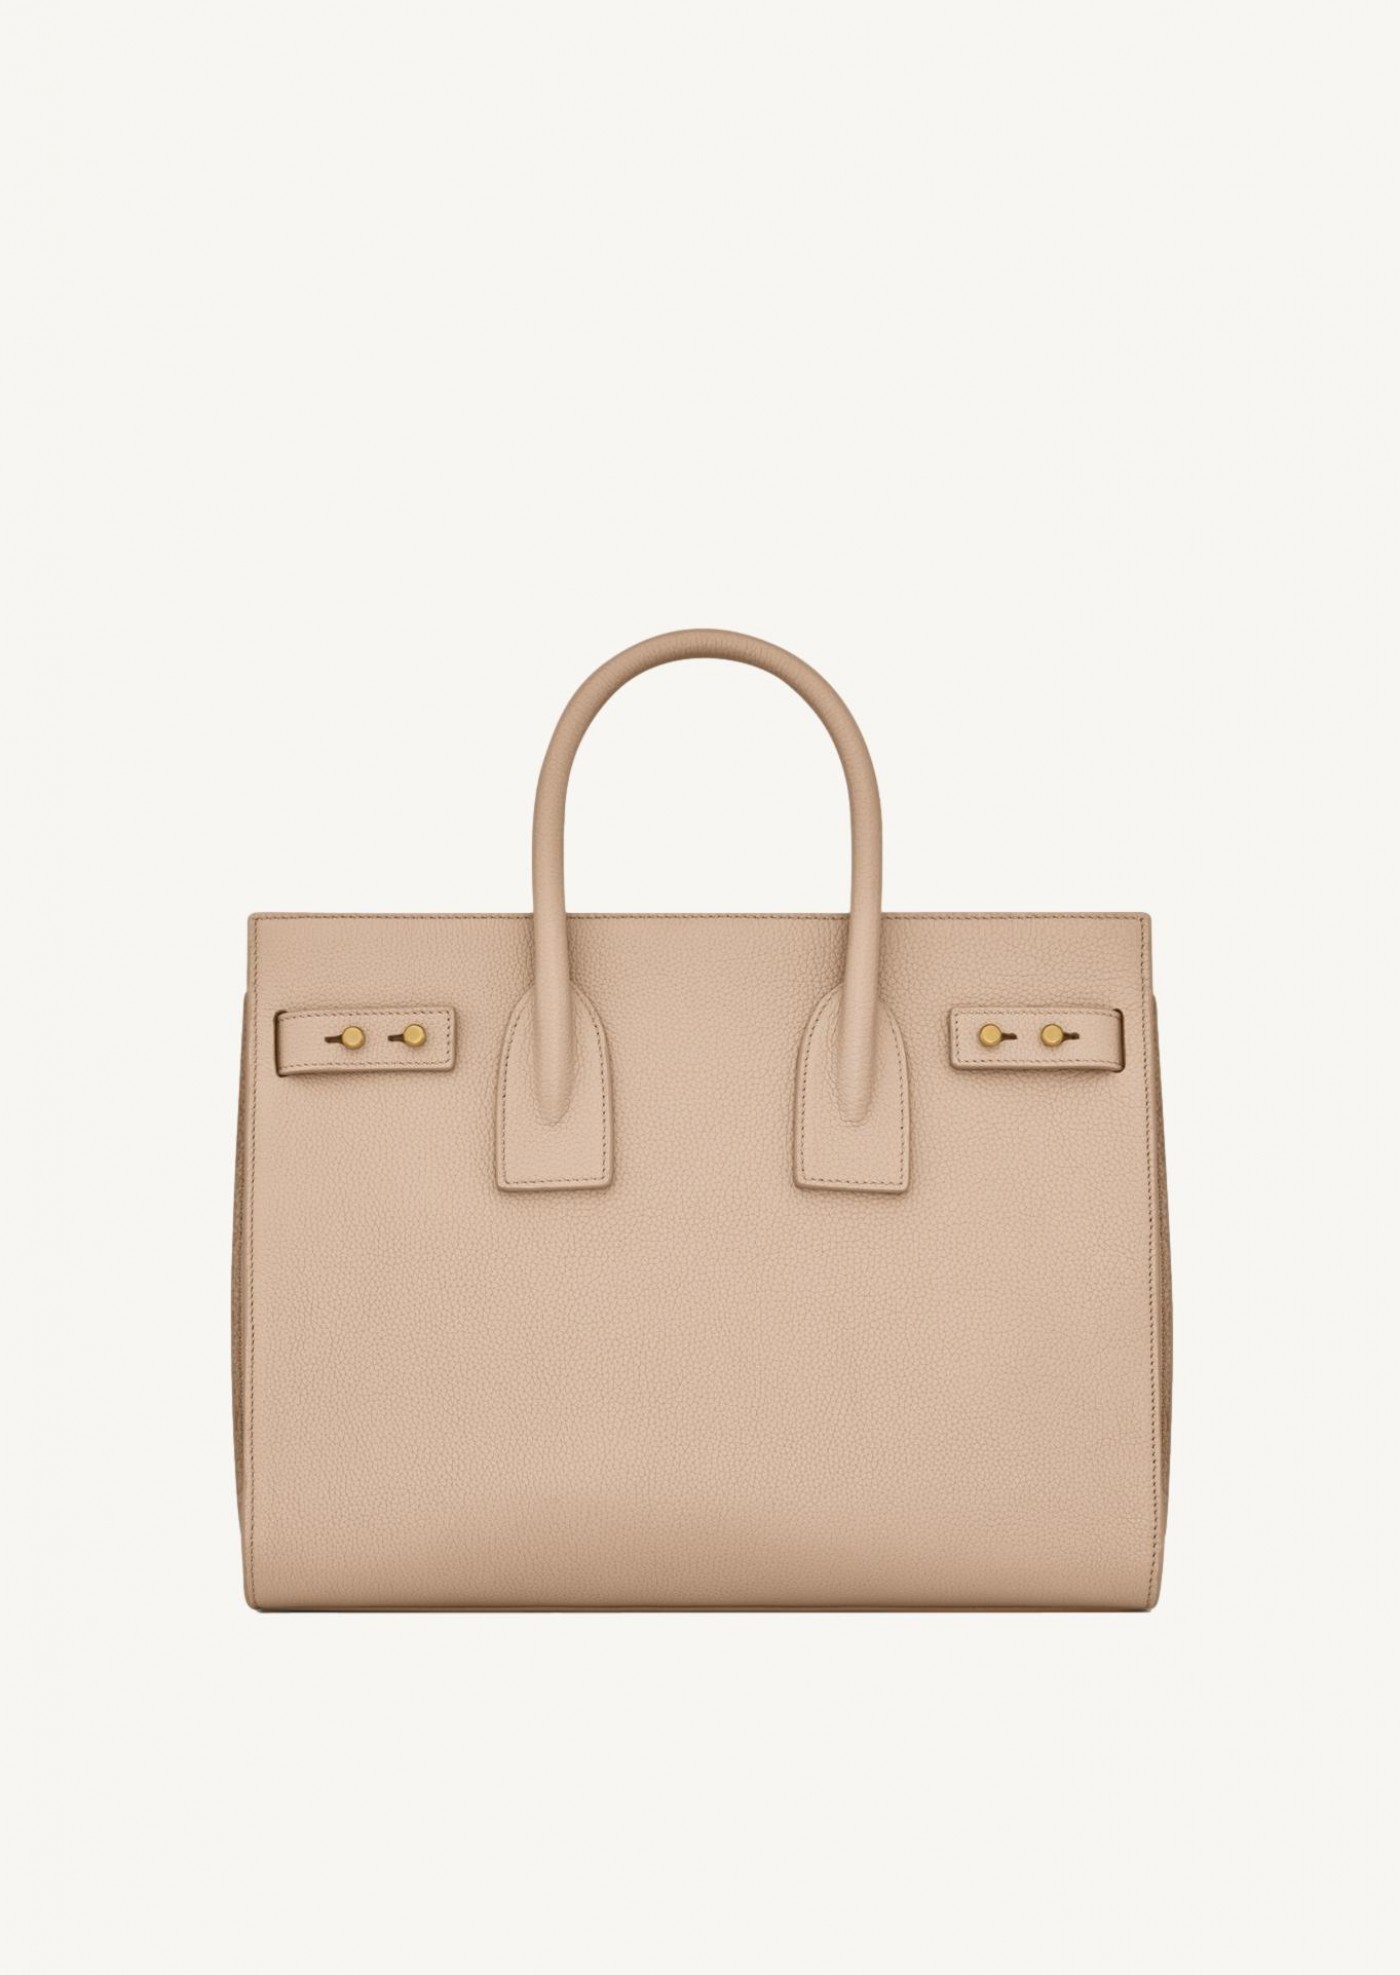 Soft day bag in grained leather - Beige